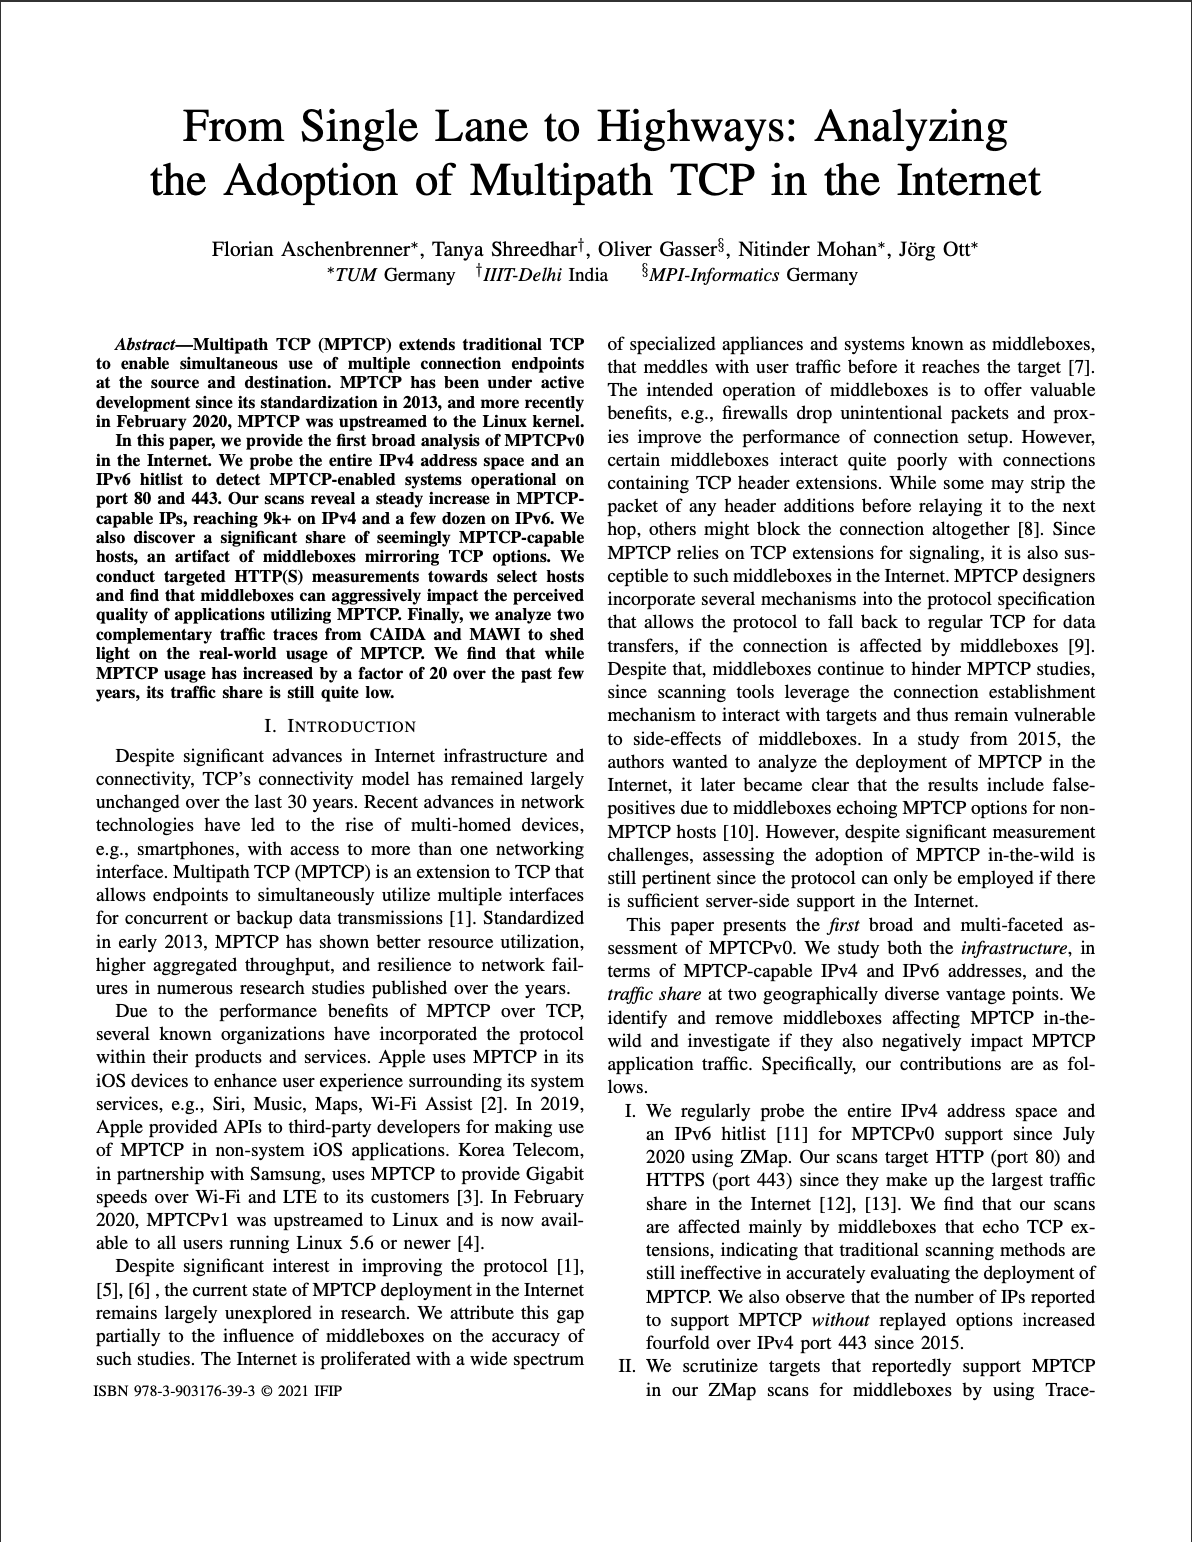 2021/mptcpScan_ifip.png